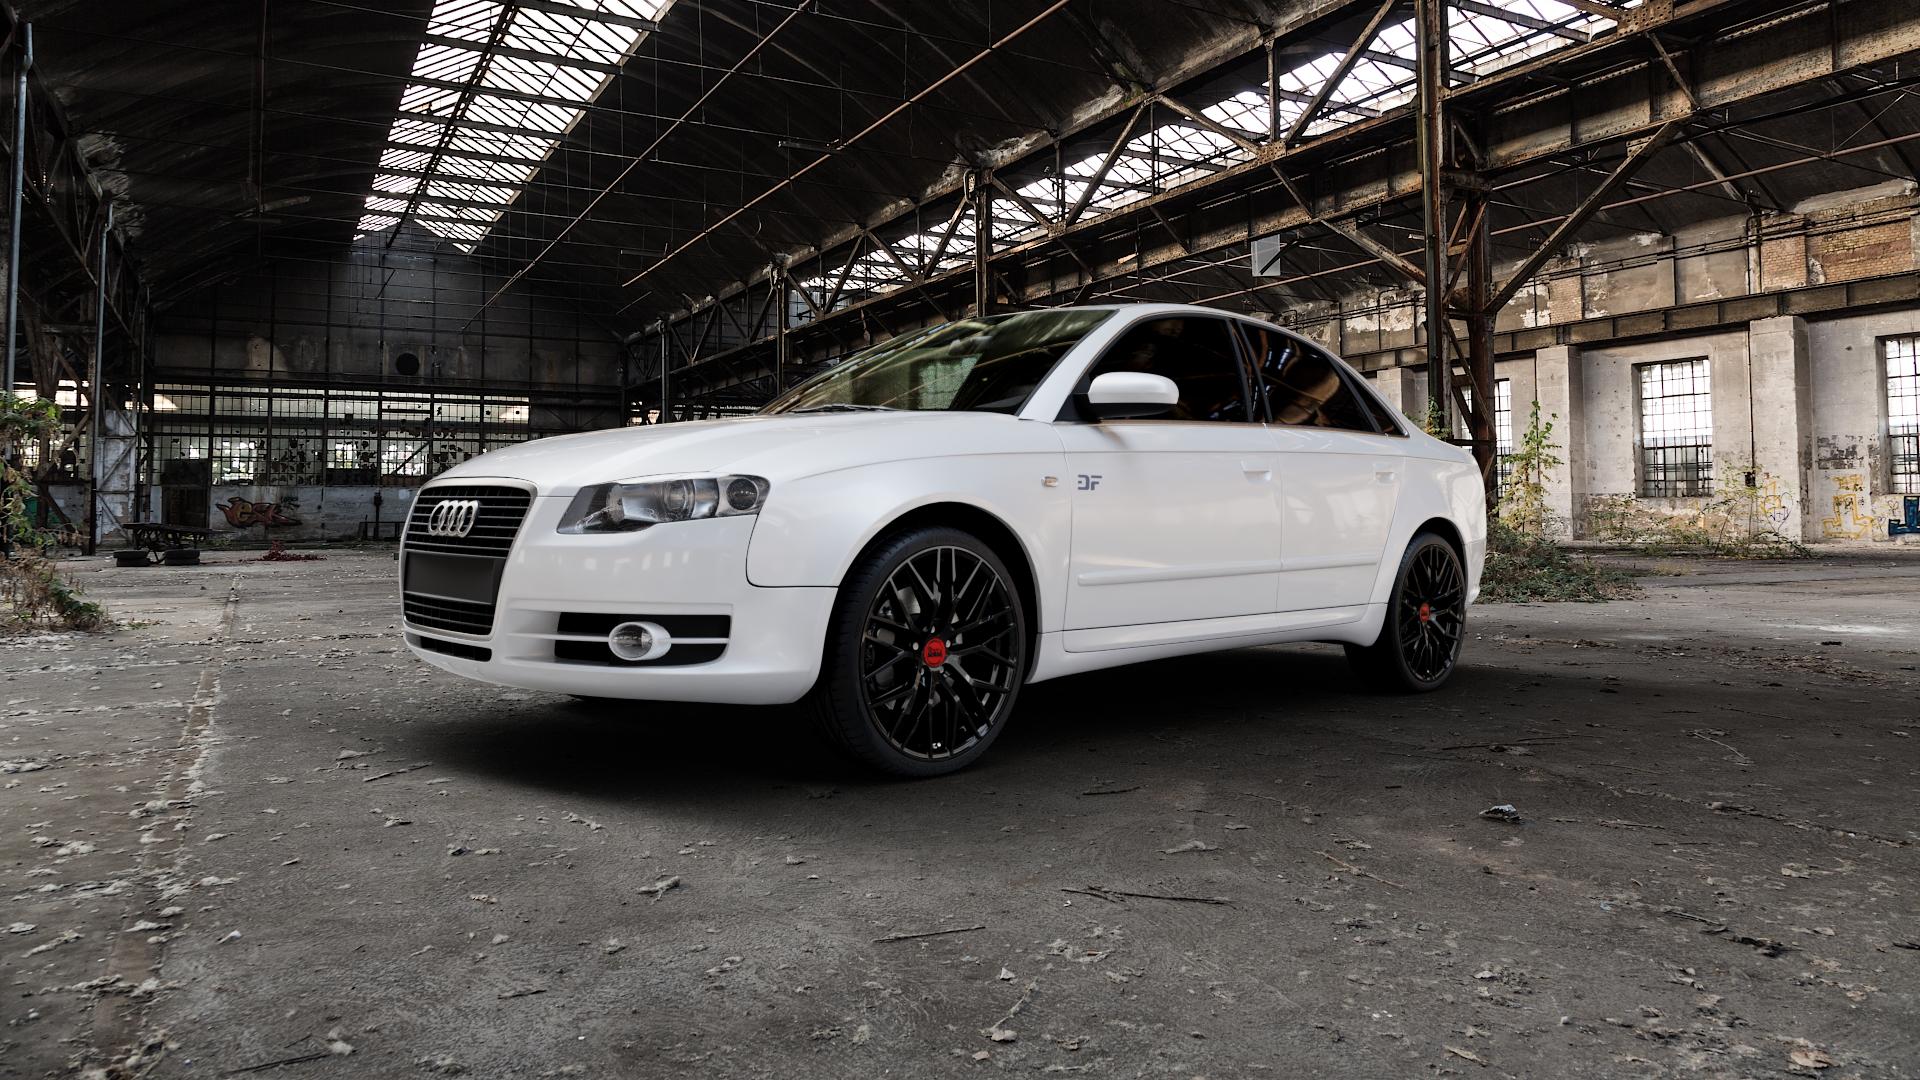 Audi A4 Type 8EC/B7 (Limousine) 4,2l RS4 quattro 309kW (420 hp) Wheels and  Tyre Packages